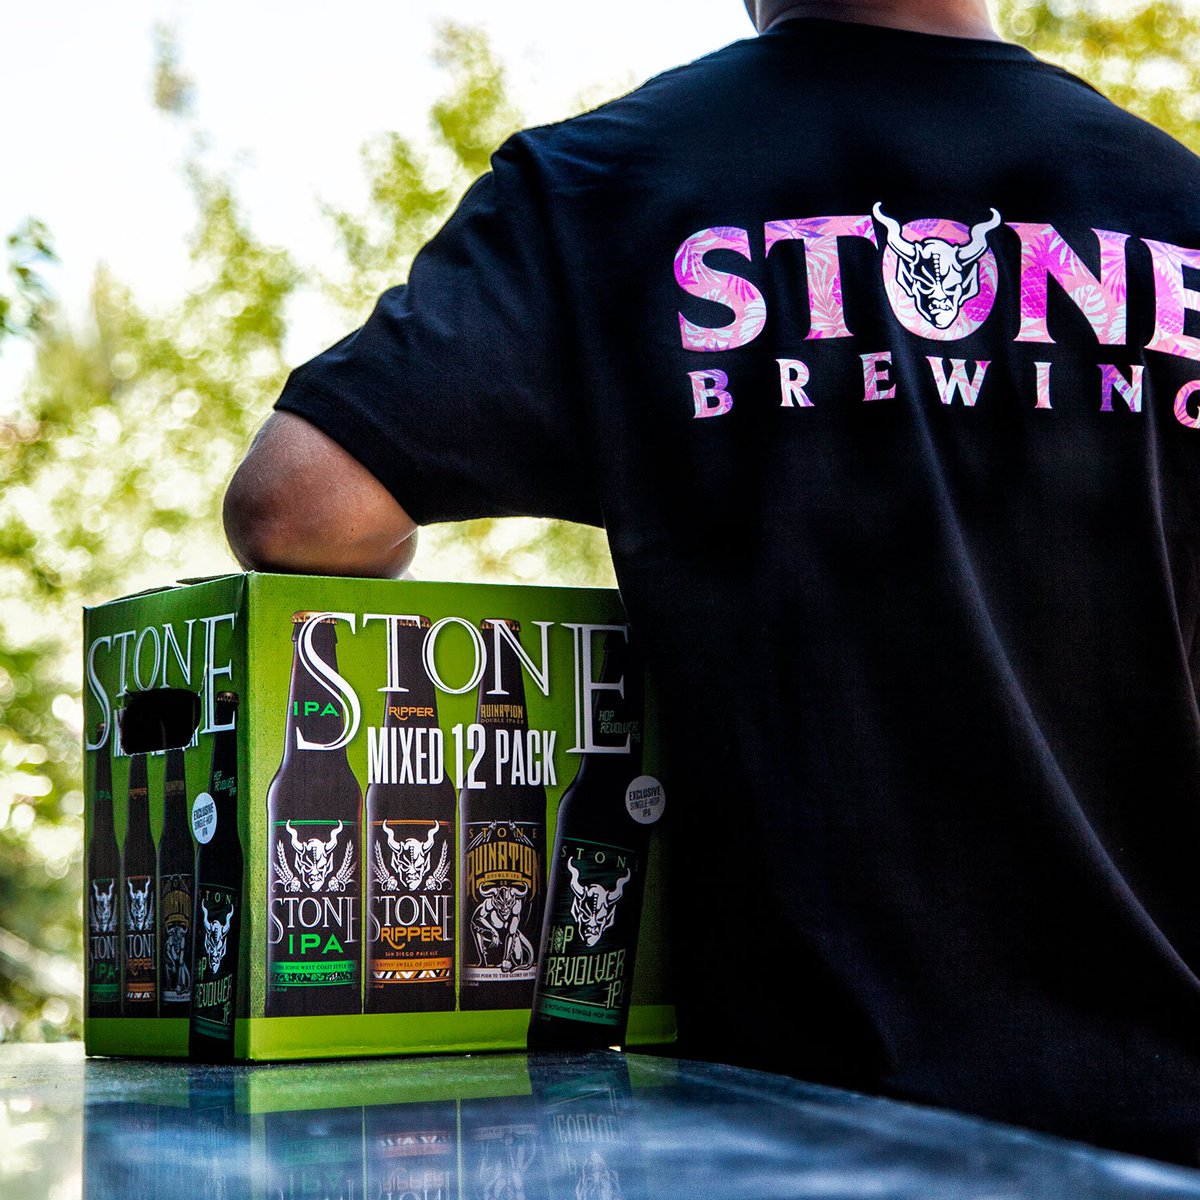 stone brewing t shirt